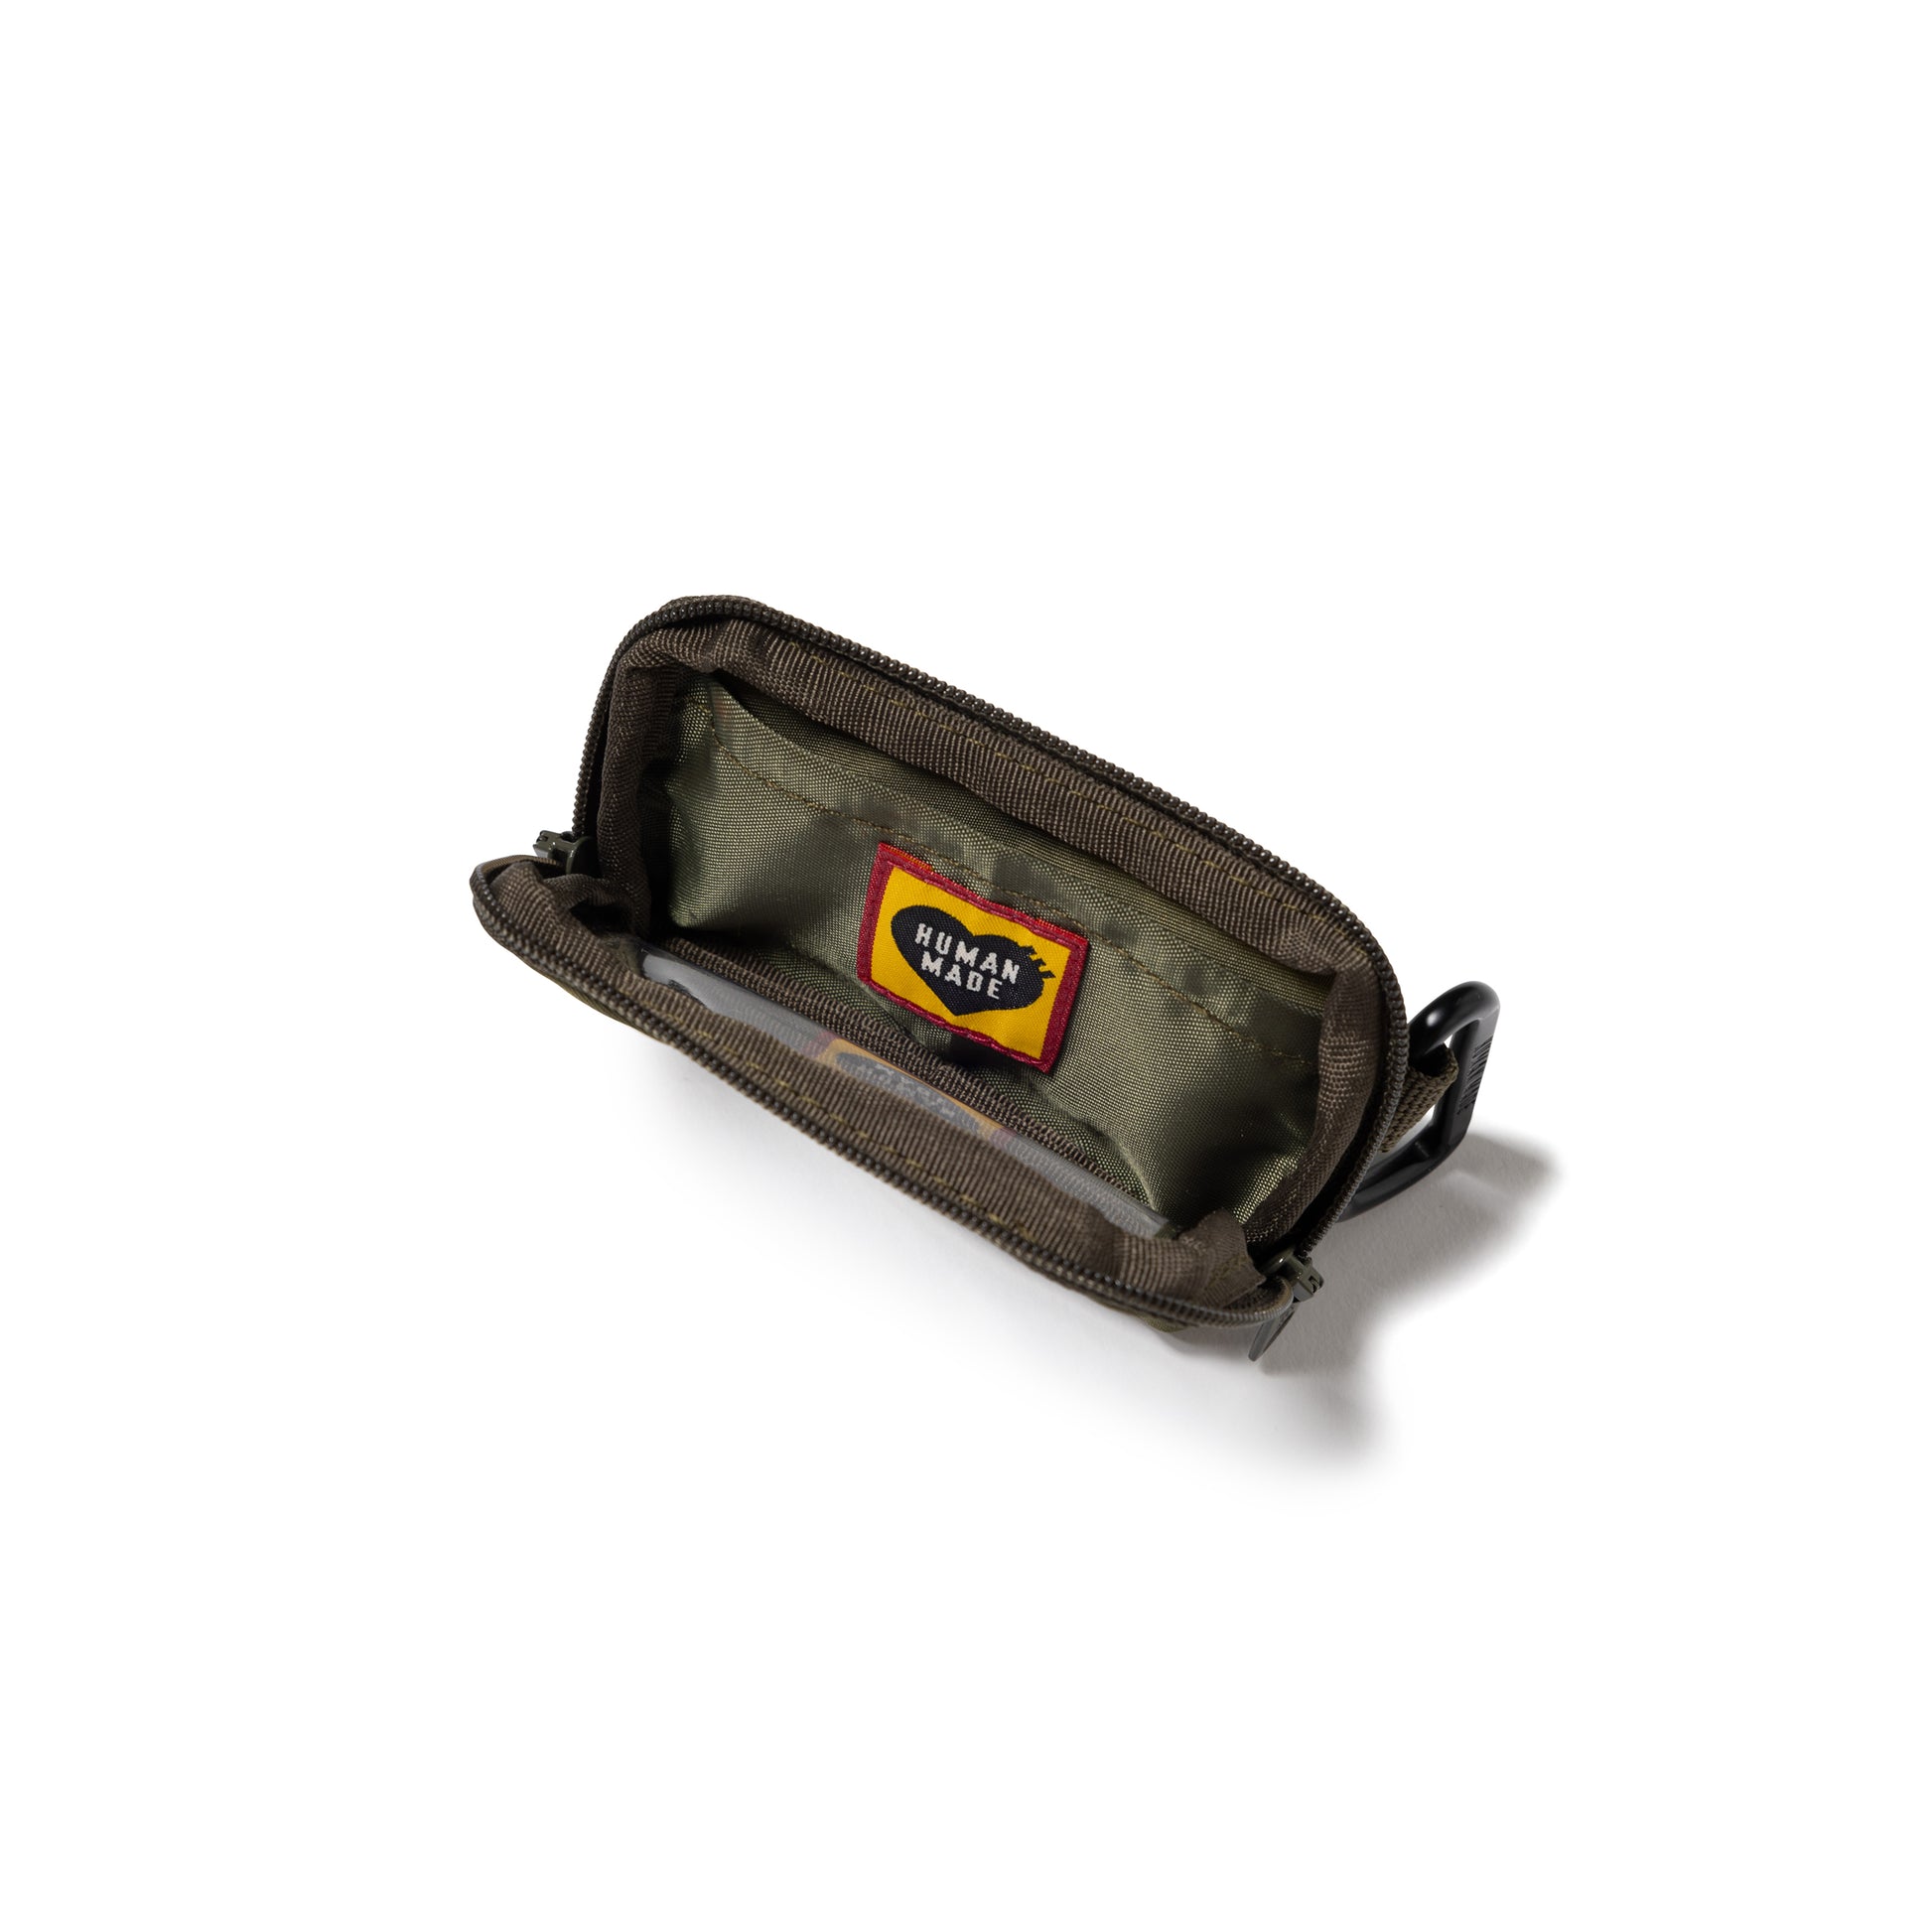 HUMAN MADE MILITARY CARD CASE OD-C